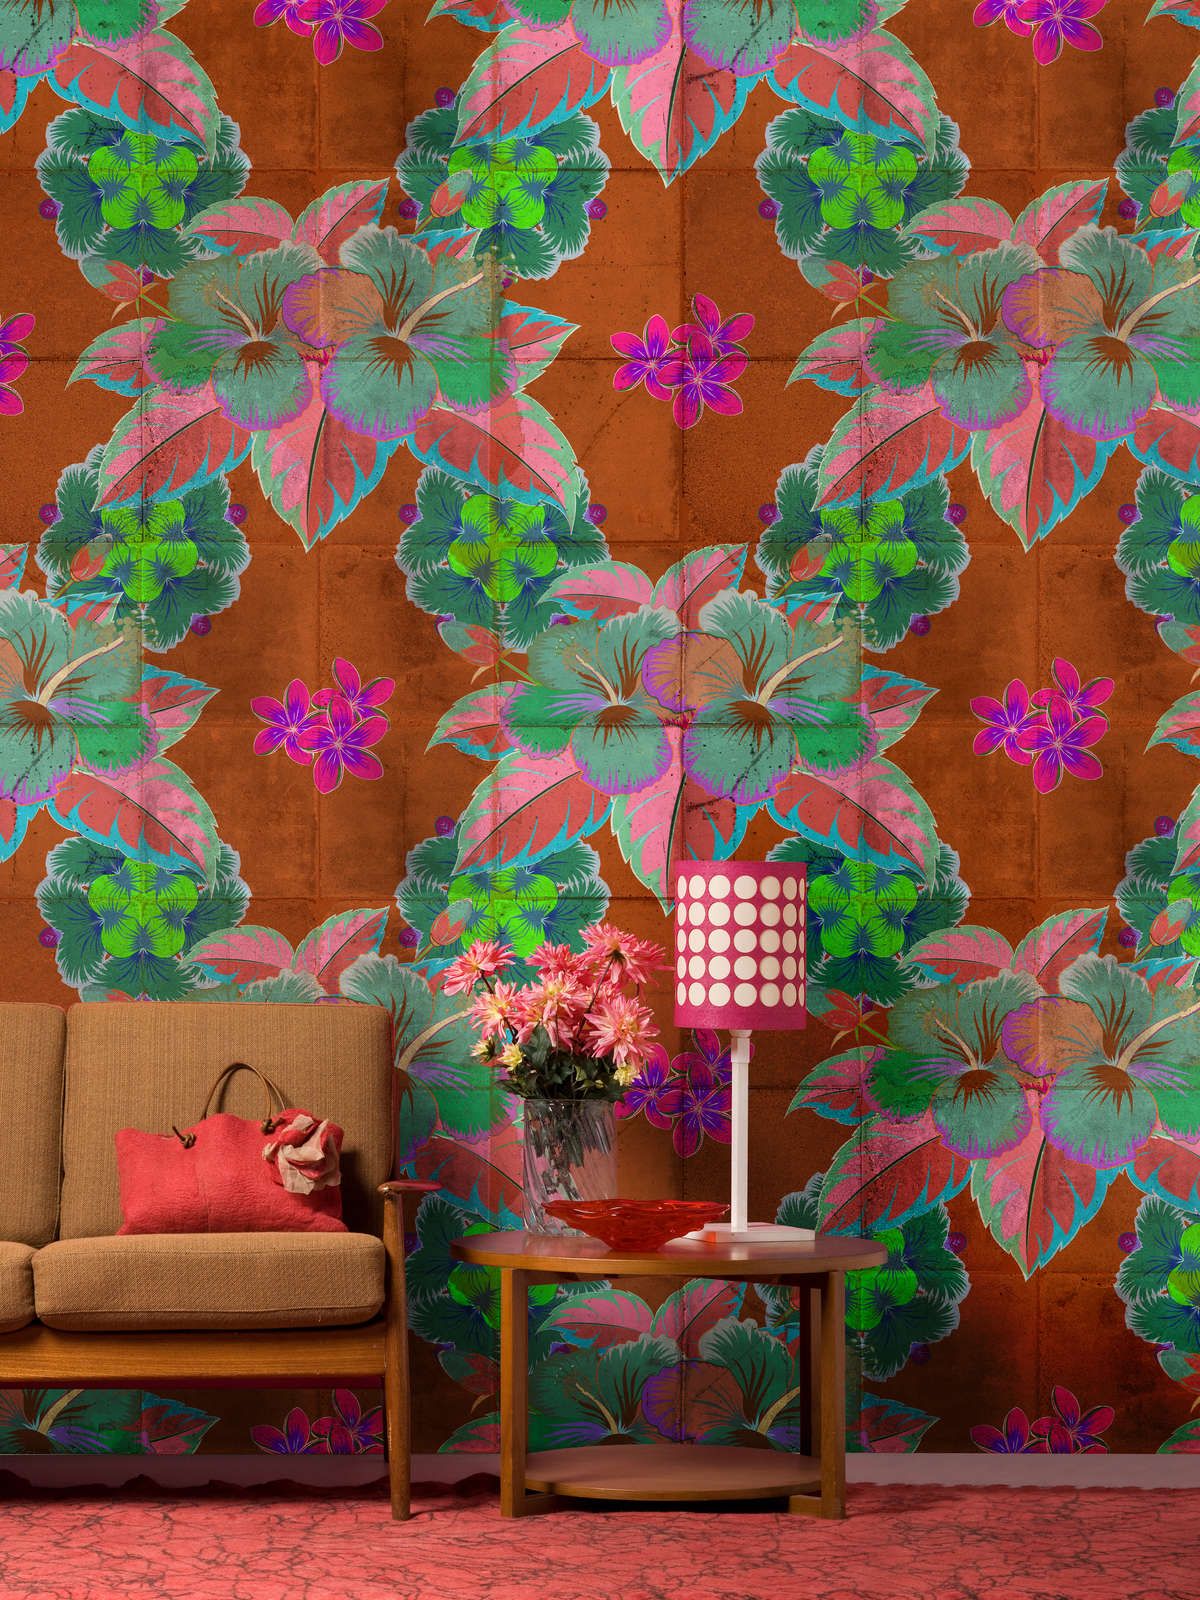             Photo wallpaper »pierre« - Leaf design with kaleidoscope effect on concrete tile structure - Lightly textured non-woven fabric
        